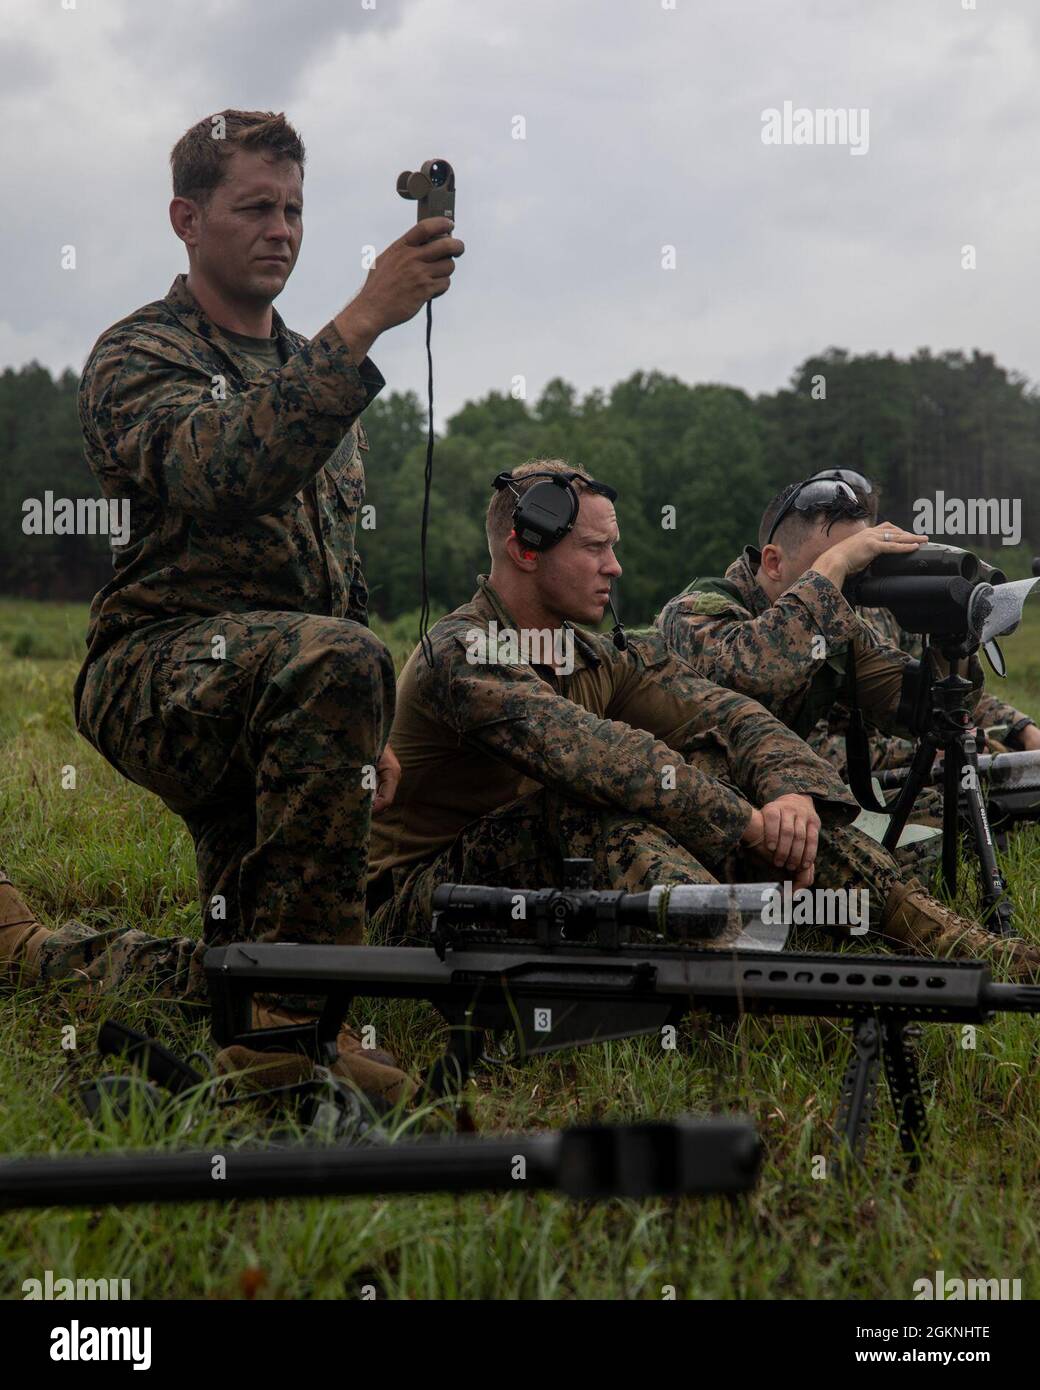 Marines with 3rd Force Reconnaissance Company, 4th Marine Division, prepare their equipment during sniper training at Camp Shelby, Mississippi, on June 6, 2021. The Marines trained with the M107 semi-automatic long-range sniper rifle, an anti-materiel rifle that fires .50 caliber ammunition out to a maximum effective range of 2000 meters. Stock Photo